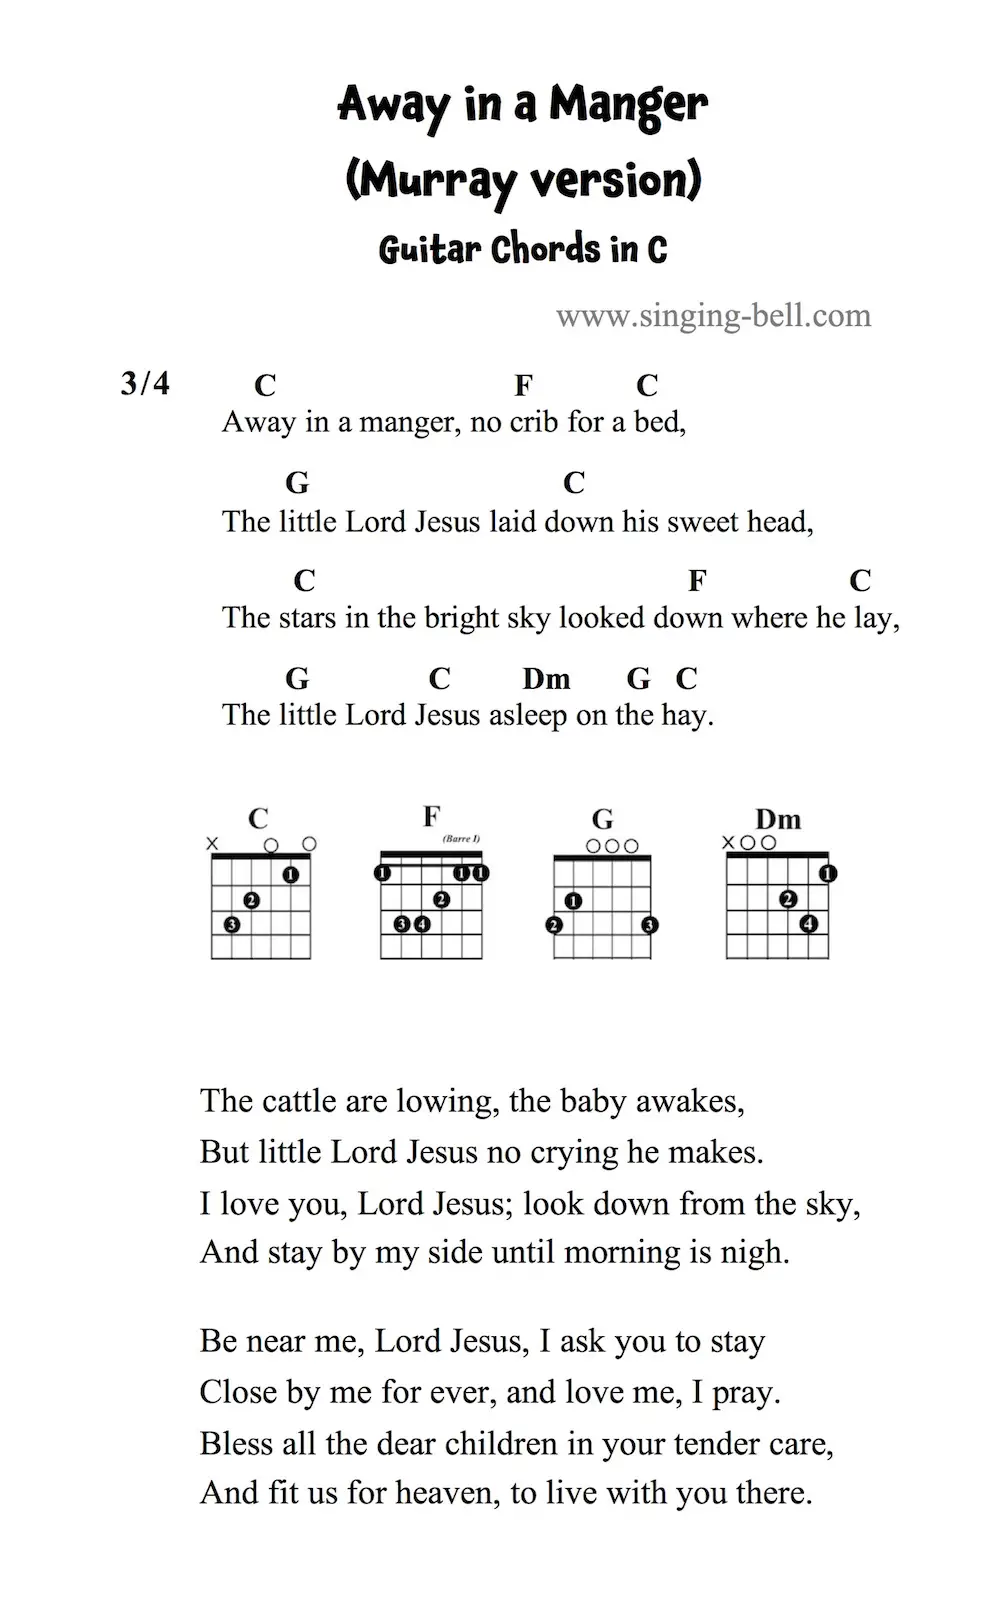 Away in a manger - Guitar Chords in C (Murray's Version)